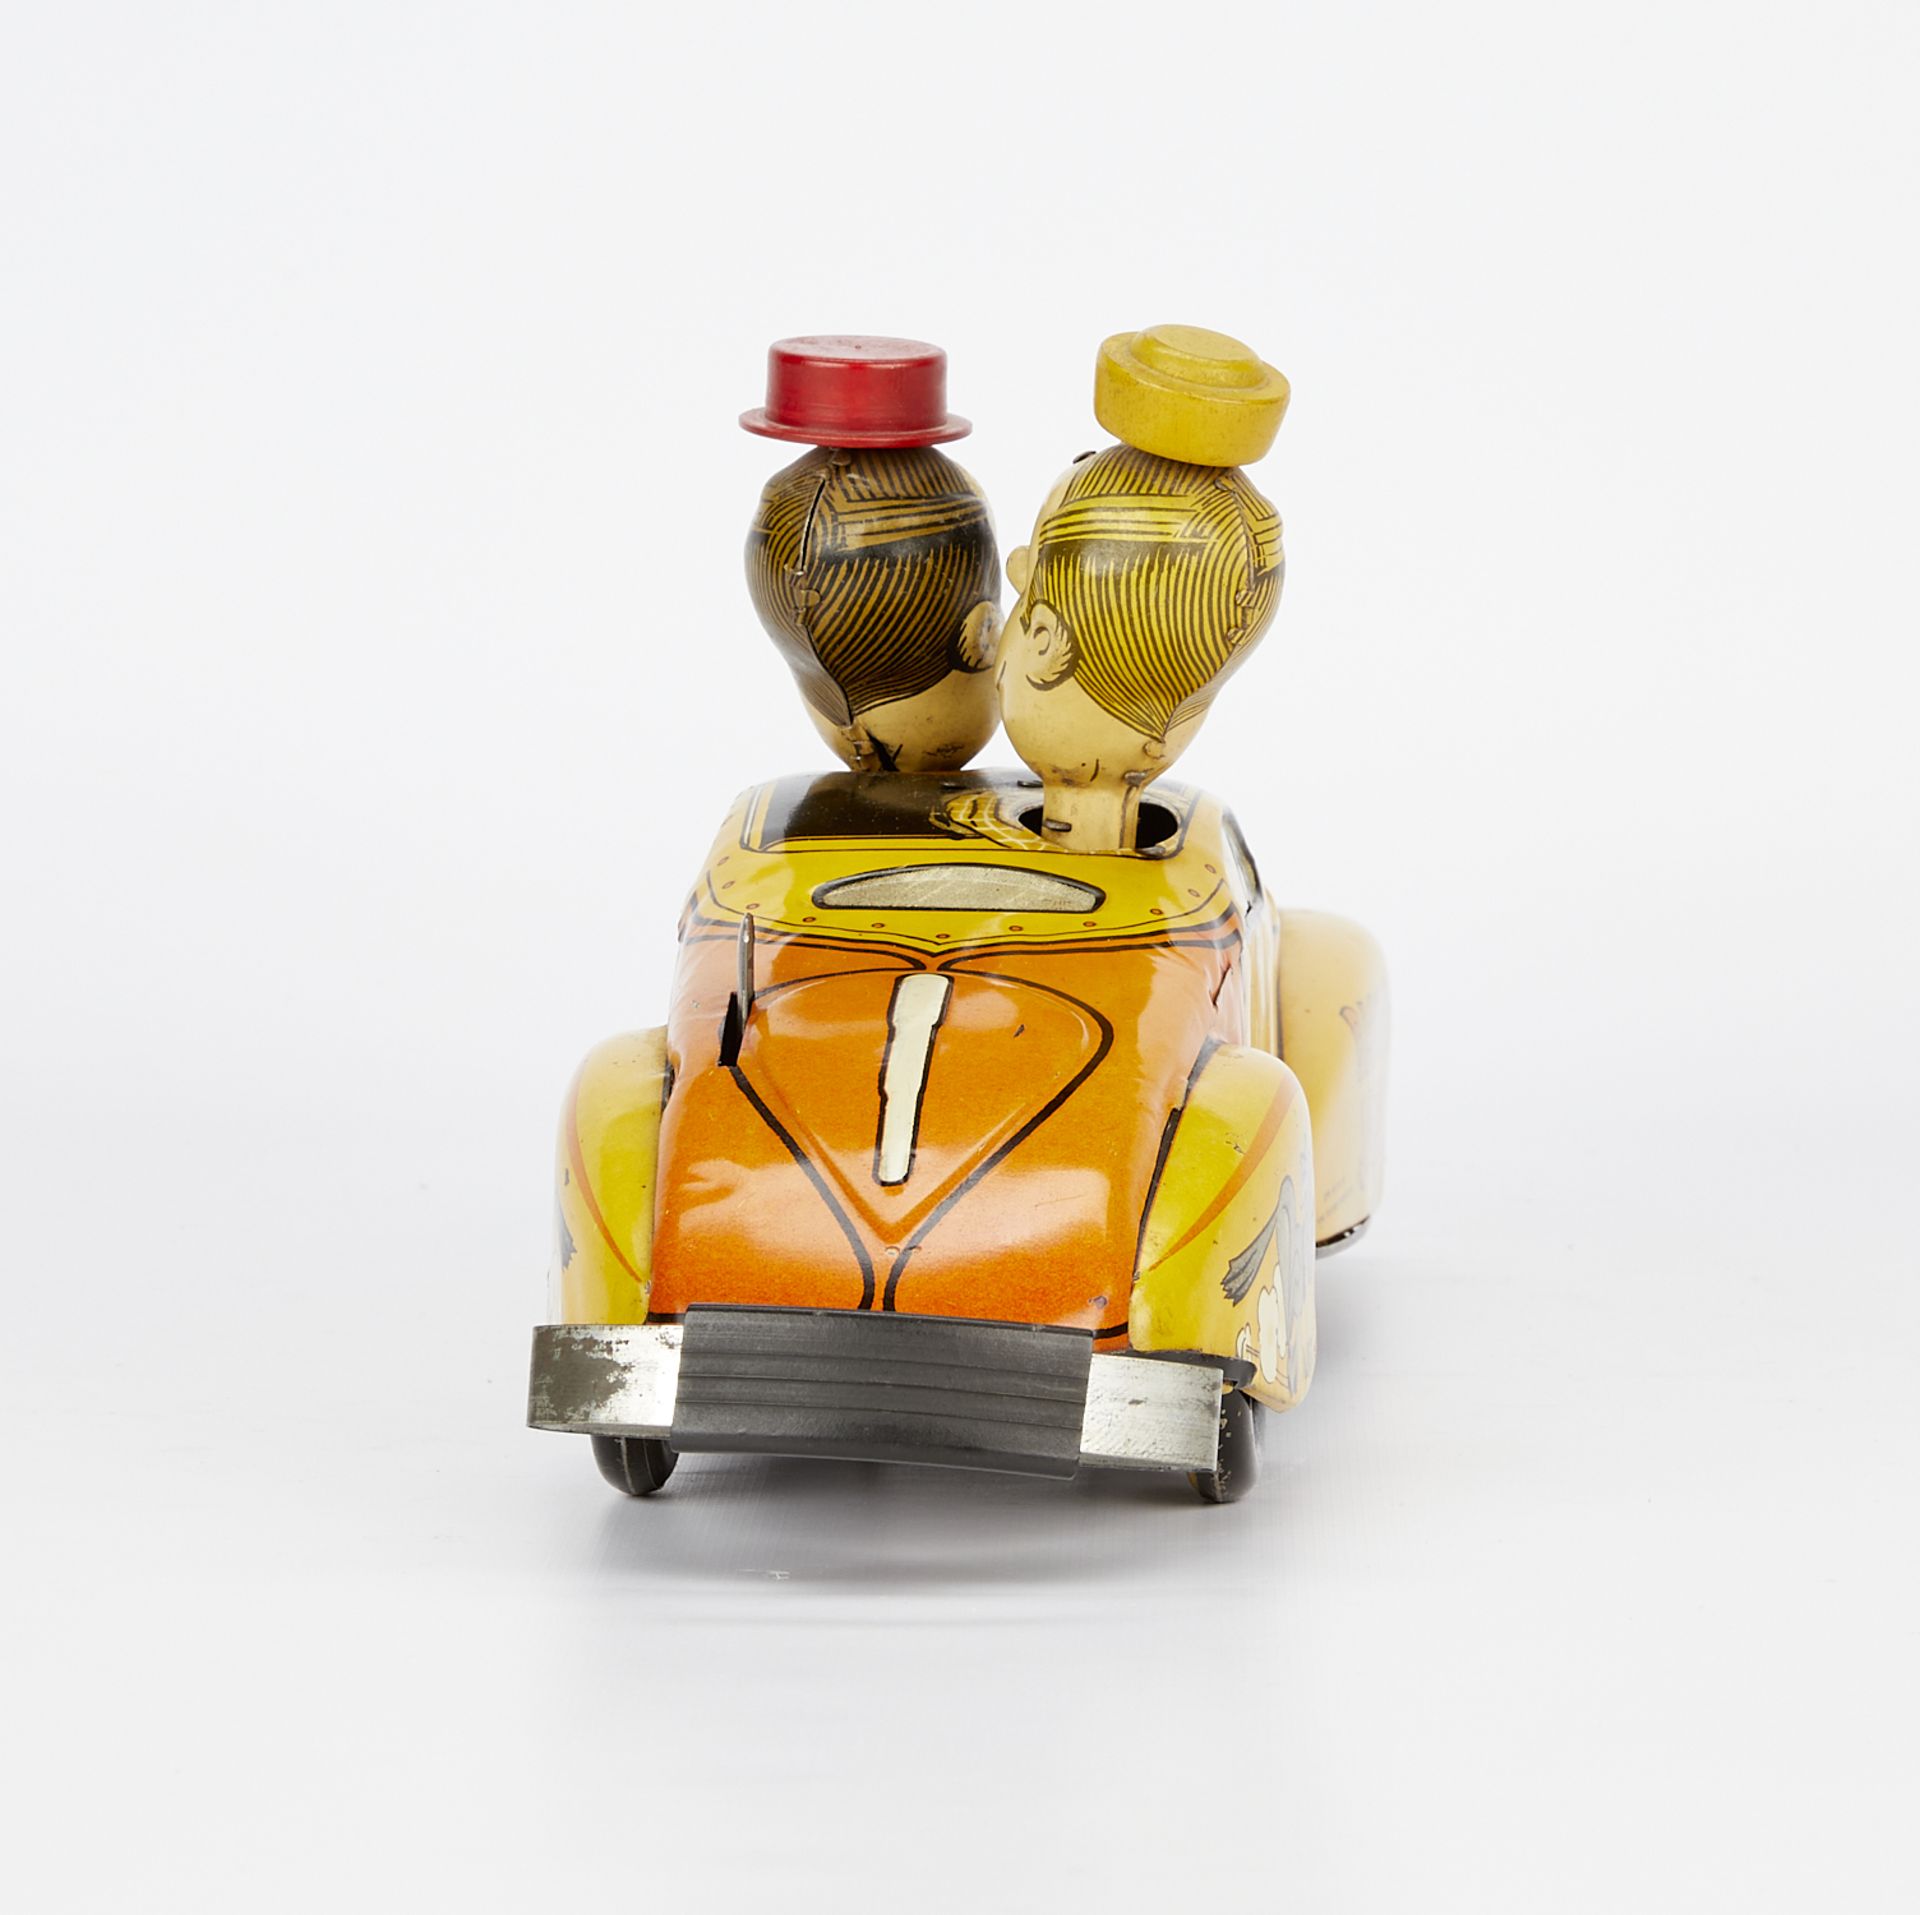 Marx Lithographed Tin Wind-Up Blondie's Jalopy Toy - Image 5 of 11